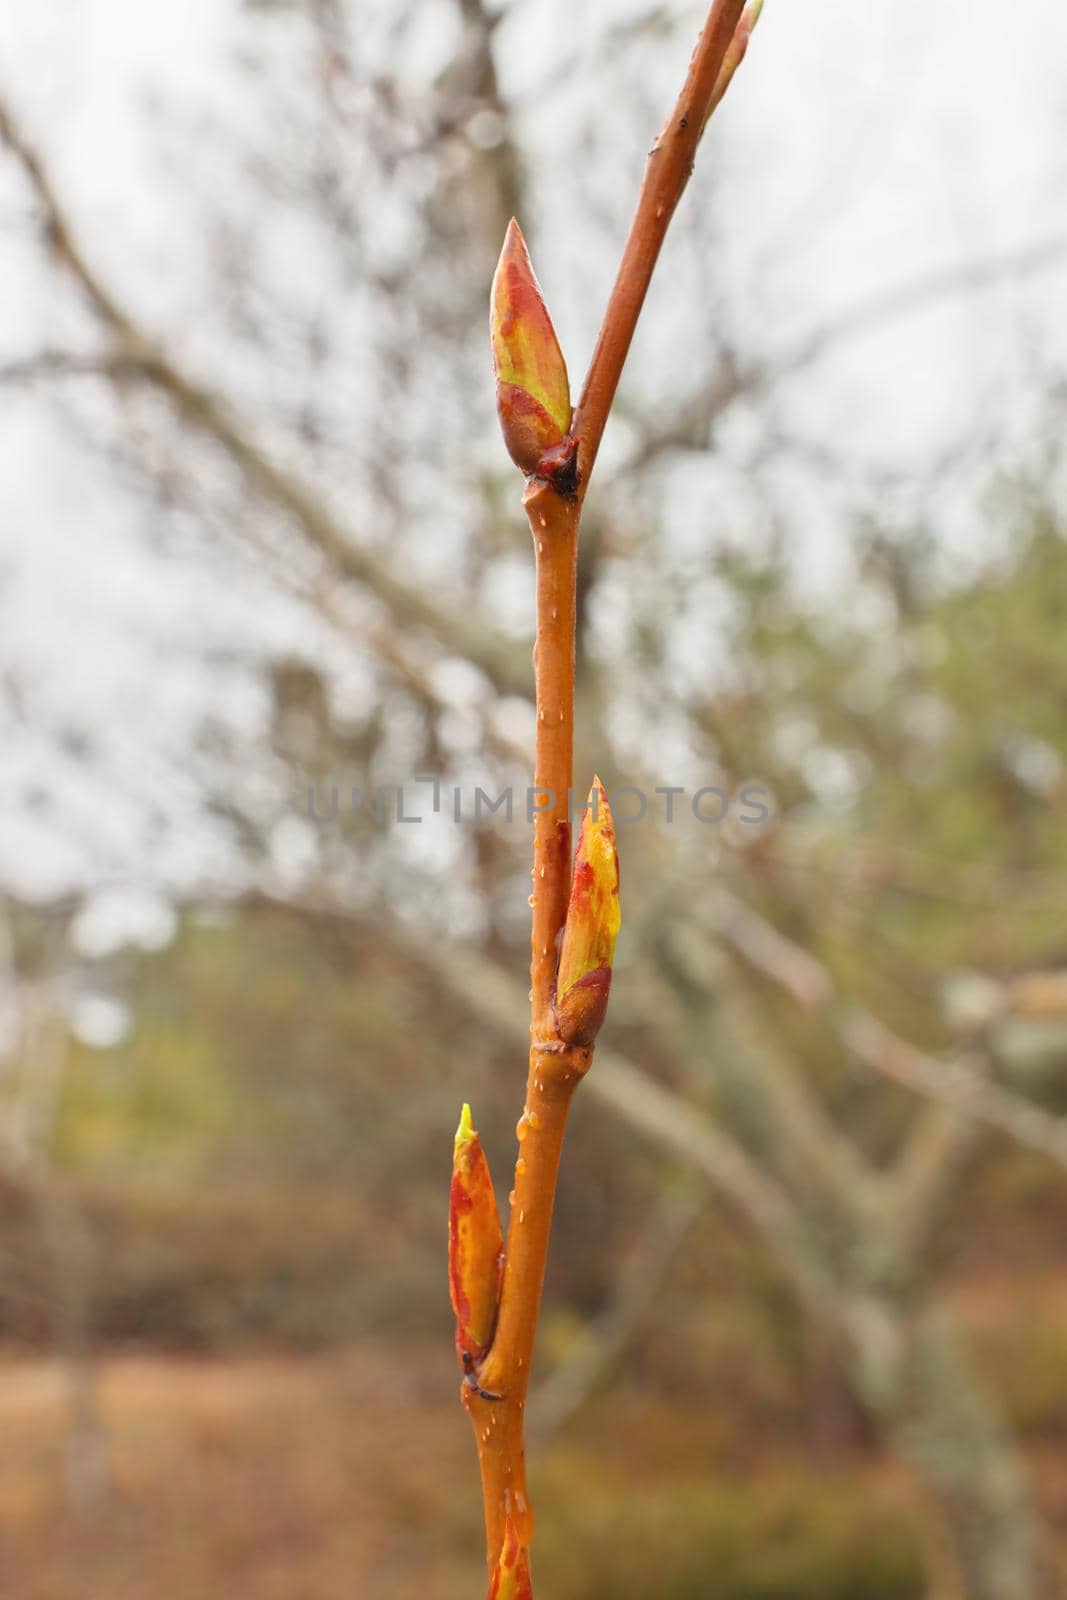 First spring buds on tree branch ready to blossom into leaves to begin photosynthesis. by markvandam